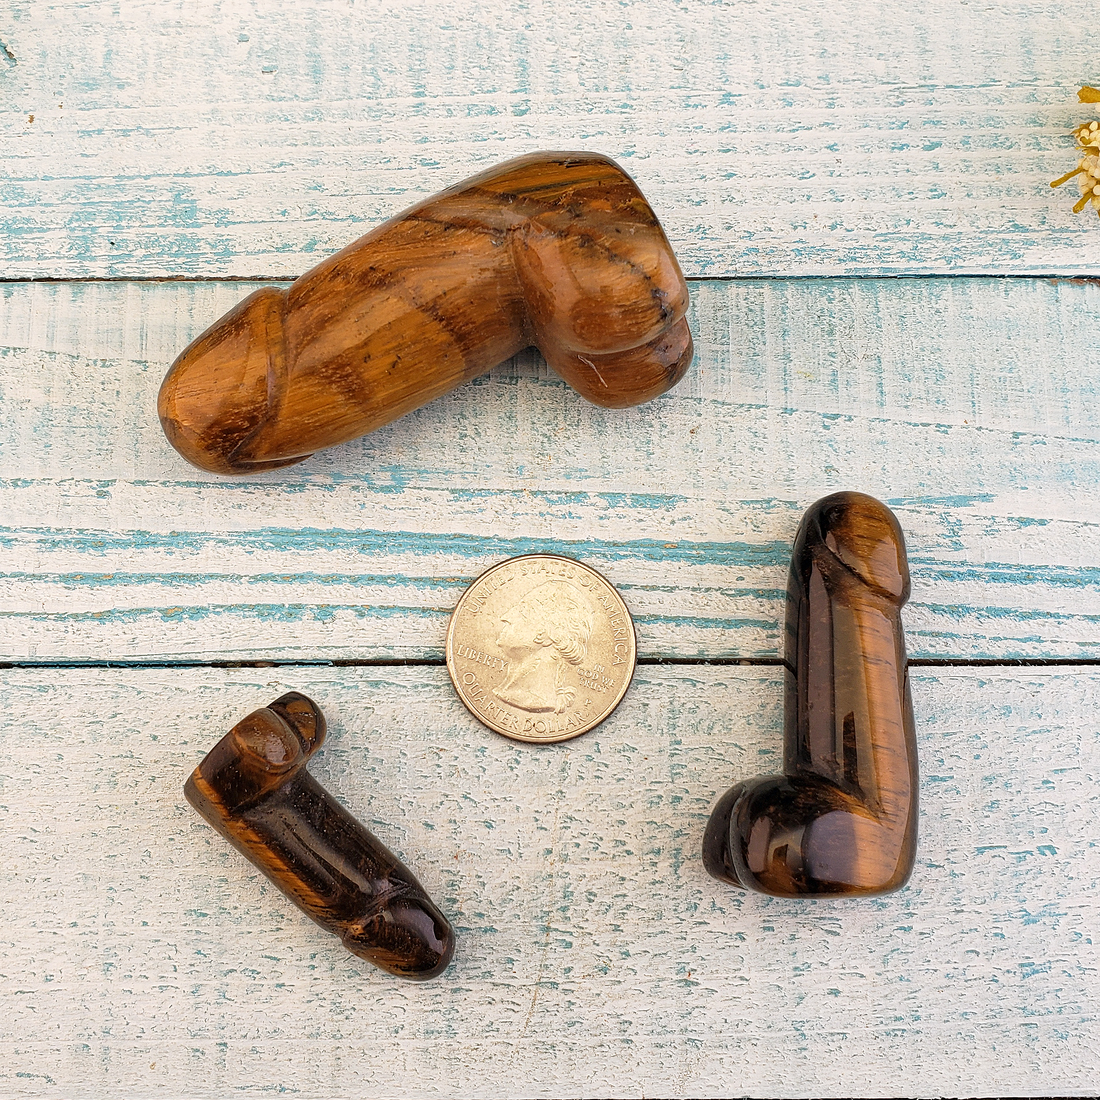 Big Dick Energy - Tigers Eye Crystal Penis Power Totem Gift Box - Size Compared to Quarter